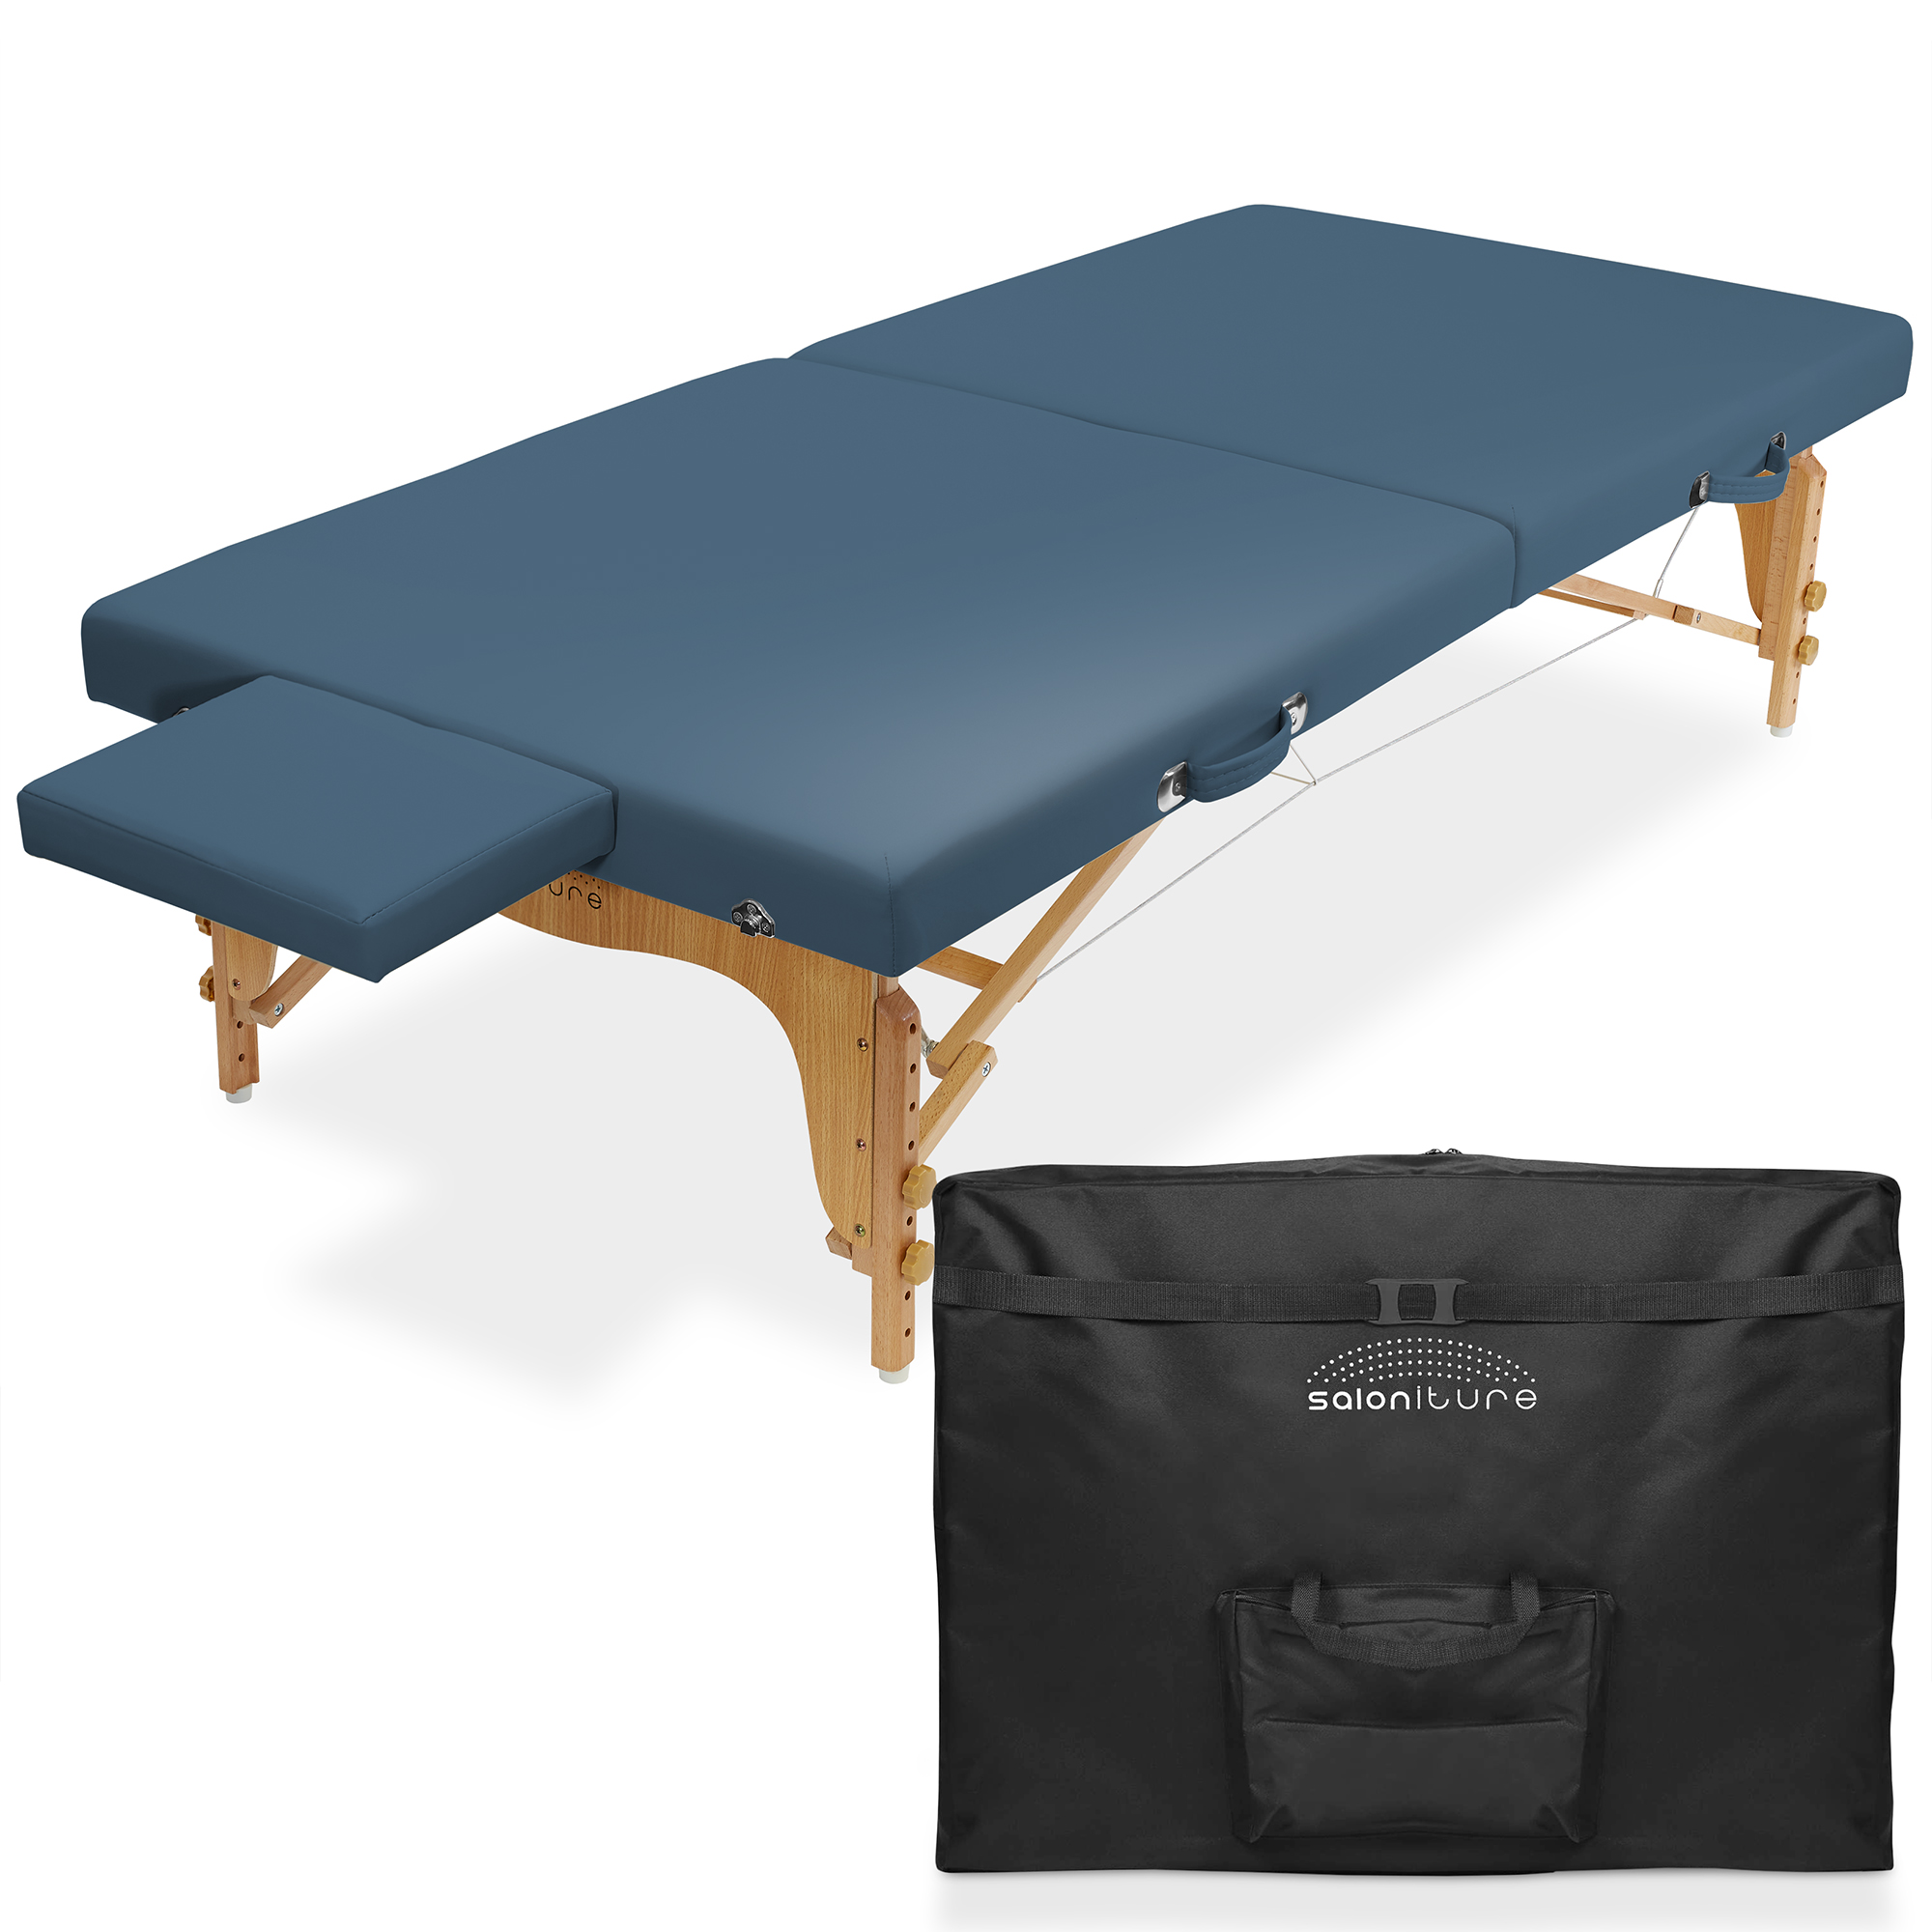 Saloniture Portable Physical Therapy Massage Table - Stretching Treatment - Blue